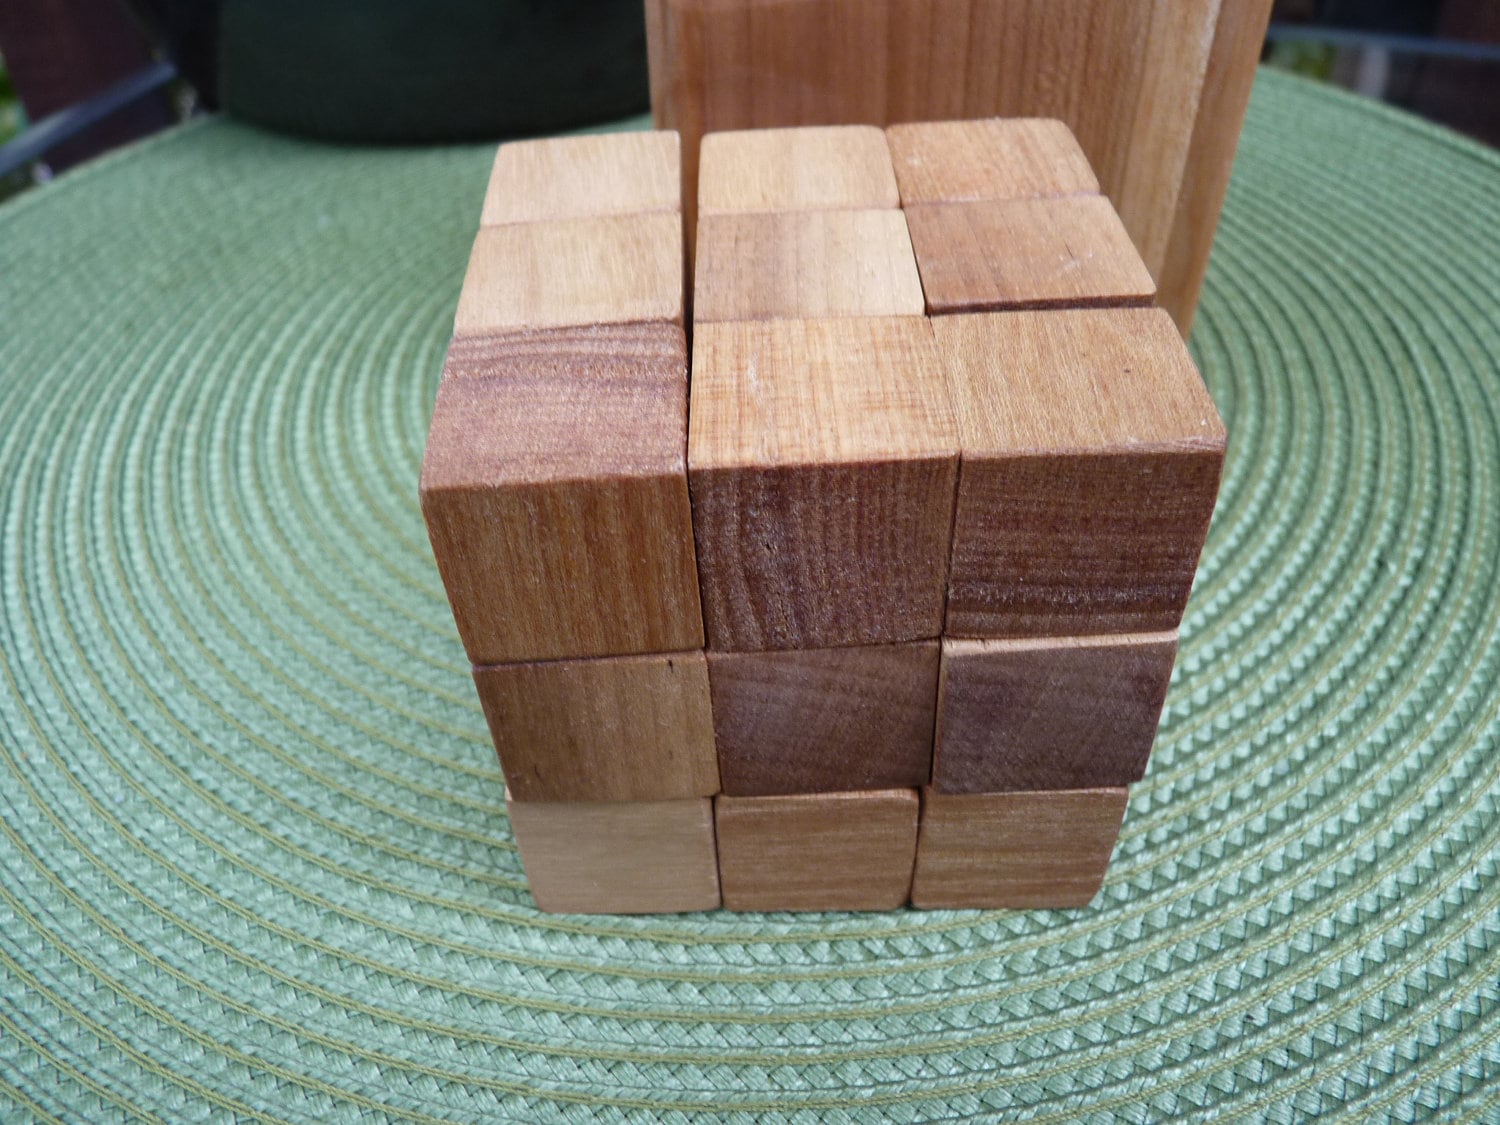 Handcrafted 7 Piece Soma Cube Puzzle in Maple with Alder Box